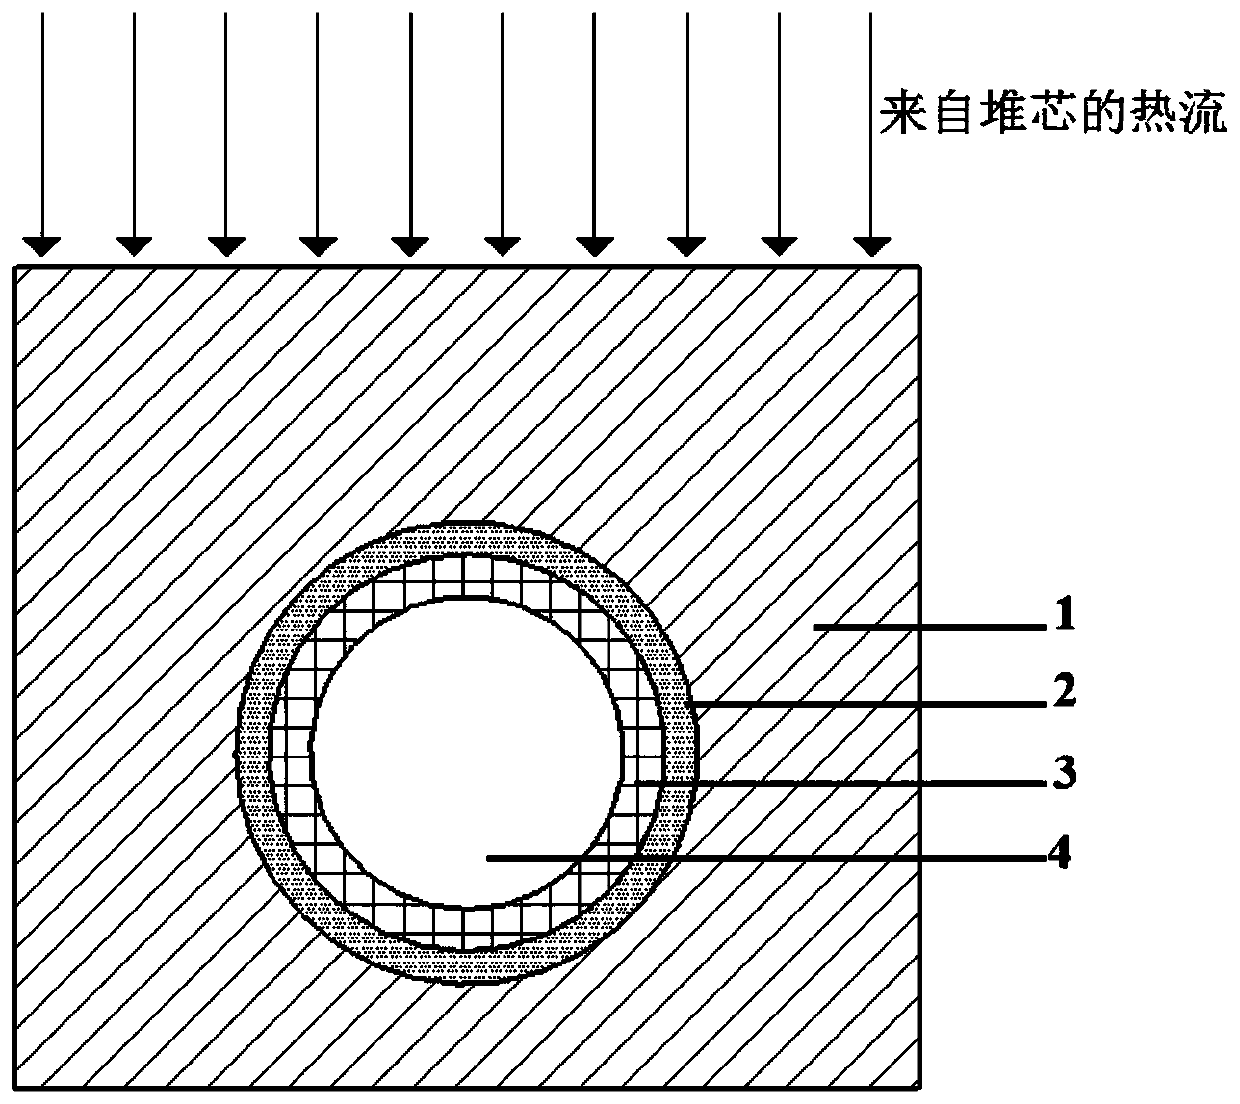 Divertor water cooling module of fusion device and its applied divertor cooling target plate structure